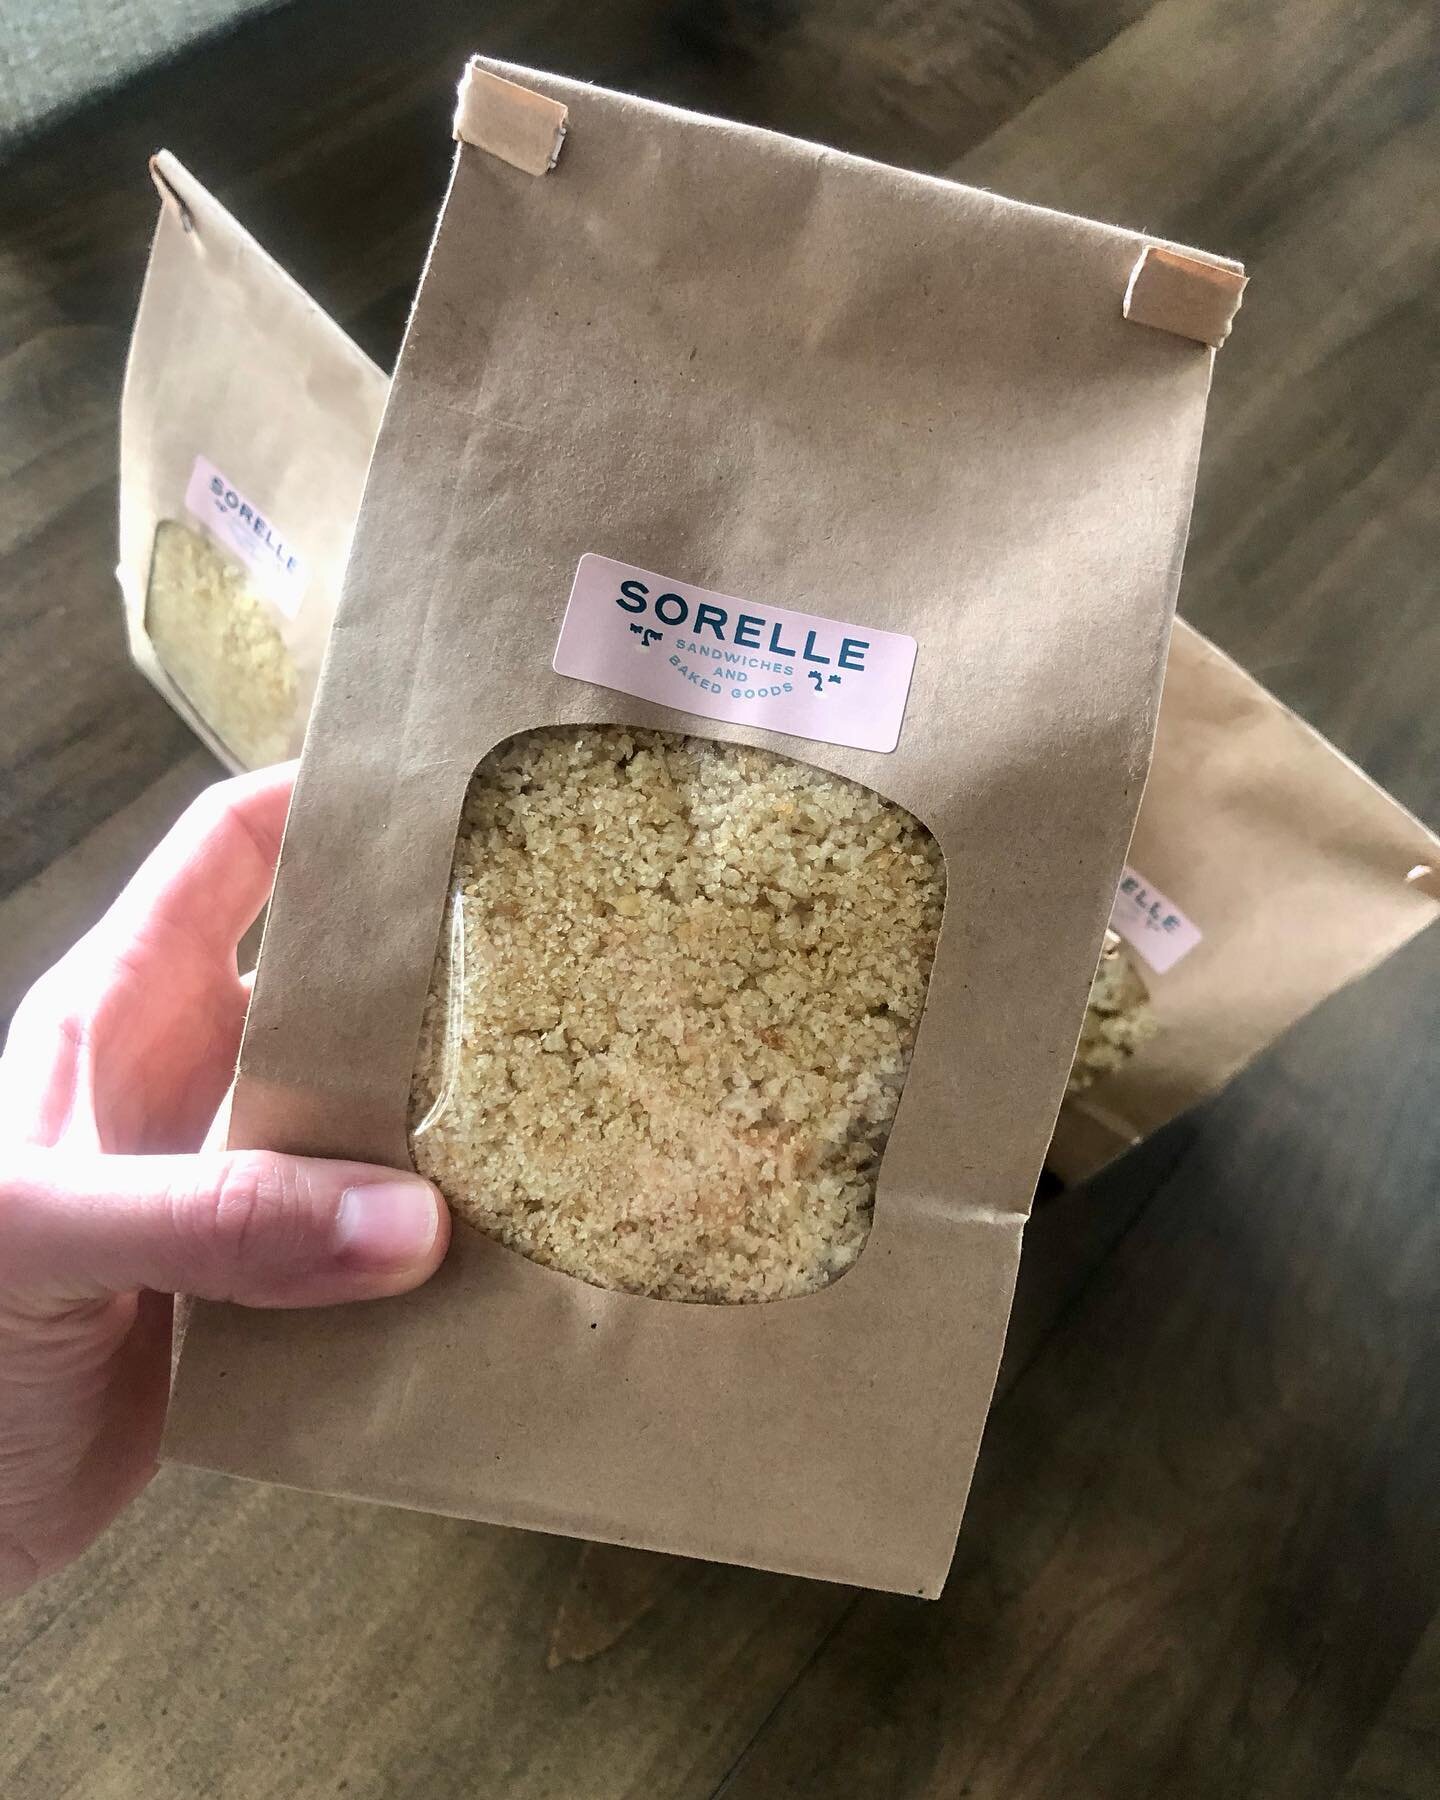 Our Focaccia Breadcrumbs are ready to grace your chicken cutlets!! We are big fans of sustainability here at Sorelle. In fact, all of our packaging is 100% compostable or recyclable. 
Our Focaccia Breadcrumbs are made from the trim of our focaccia, n